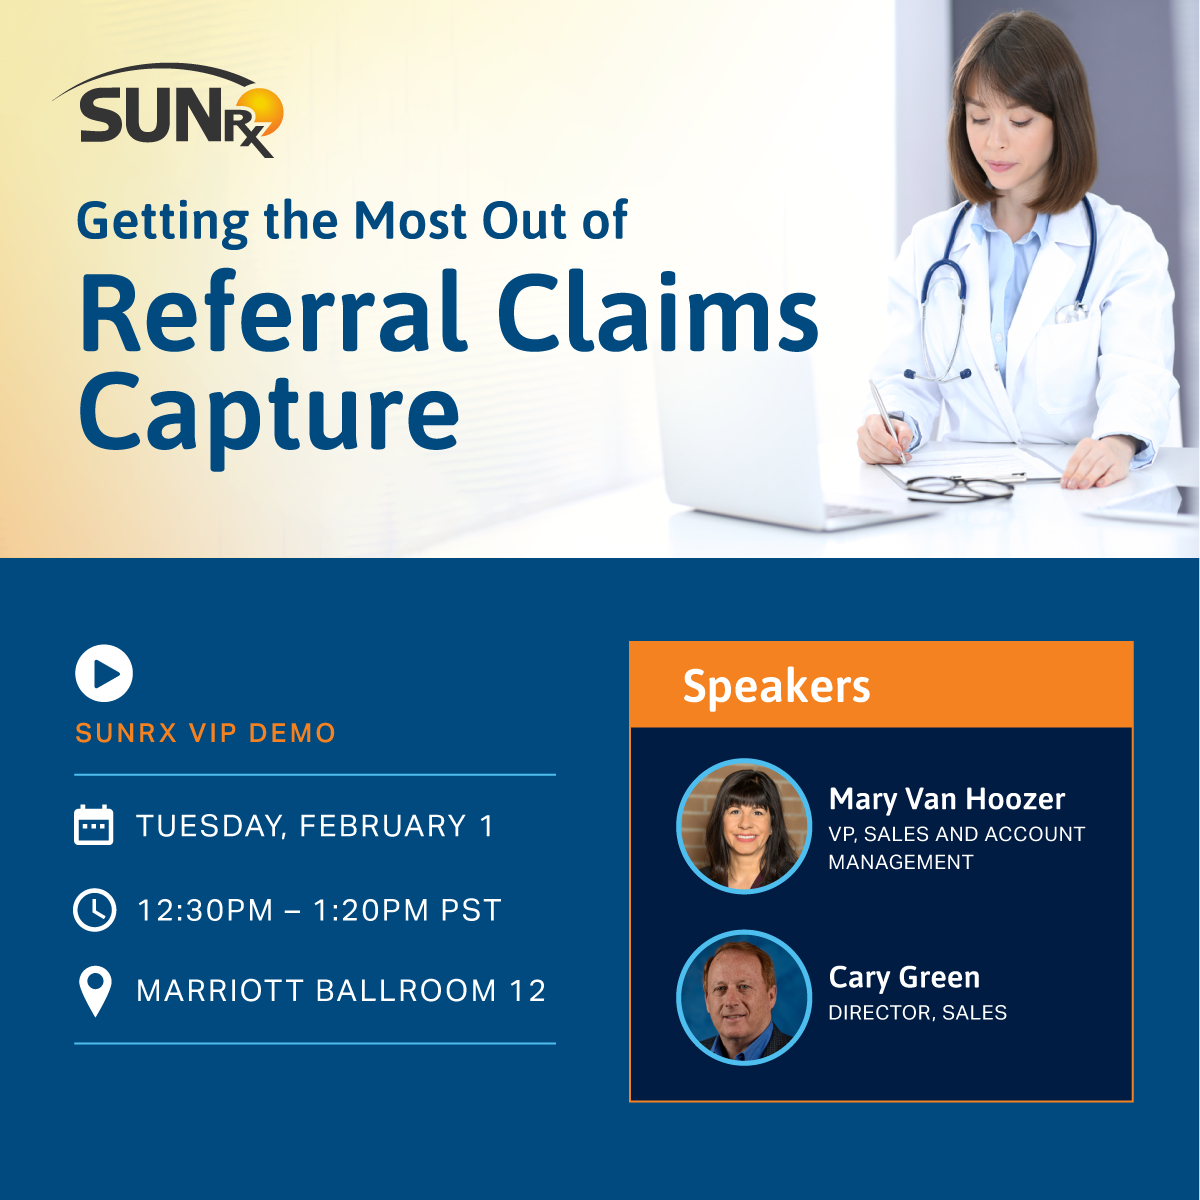 1200x1200_SUNRx-SUNRx-Getting-the-most-out-of-Referral-Claims-Capture_02.png